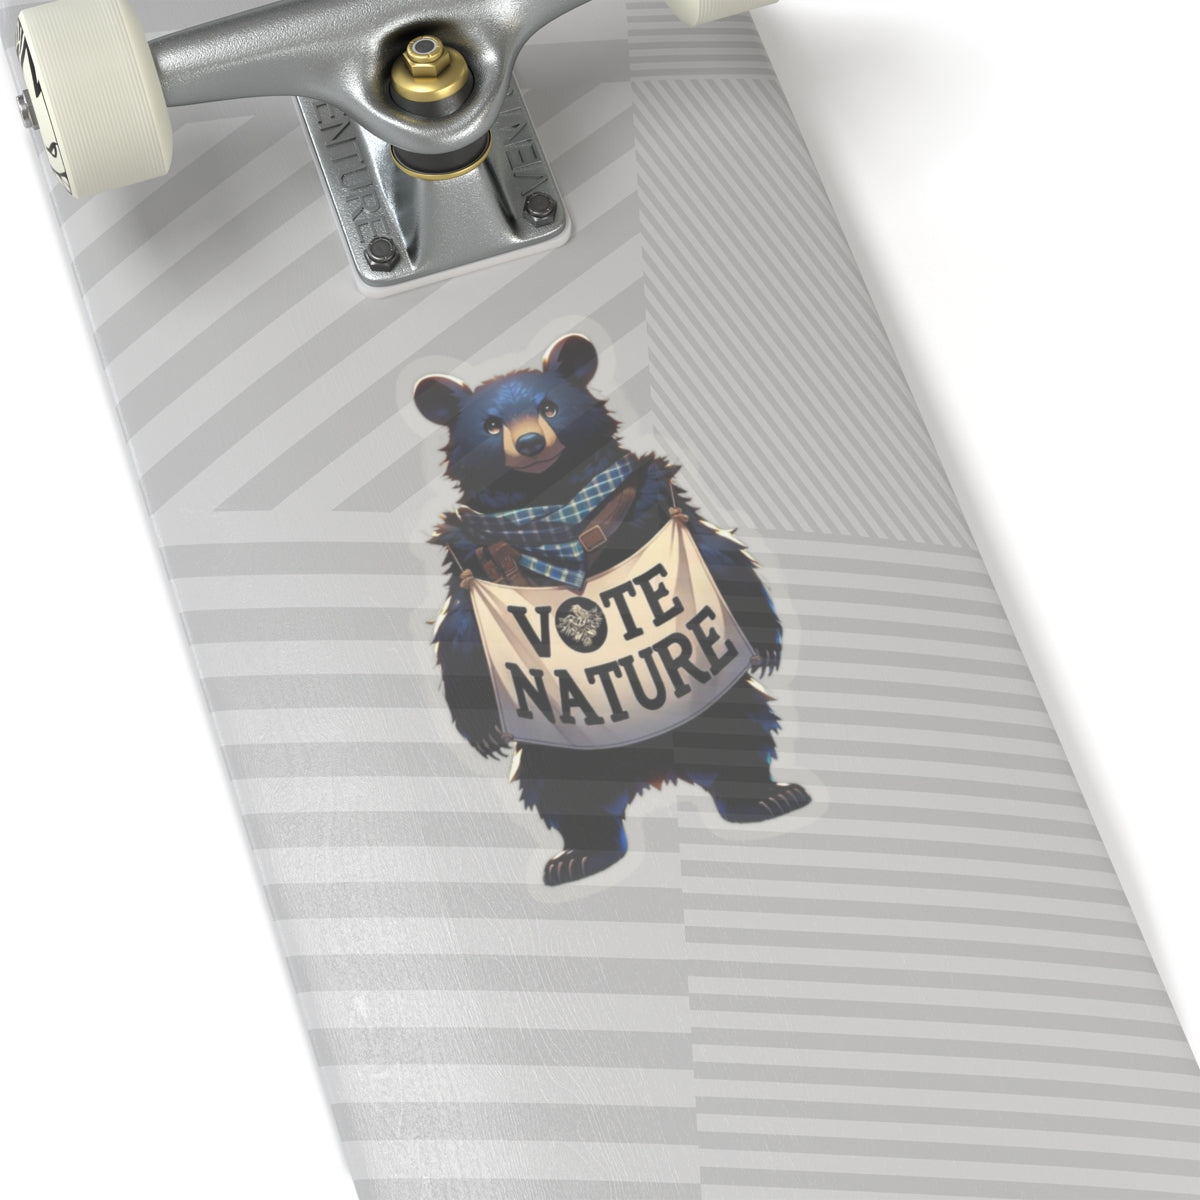 Inspirational Caring Black Bear vinyl Sticker: Vote Nature! for laptop, kindle, phone, ipad, instrument case, notebook, mood board, or wall